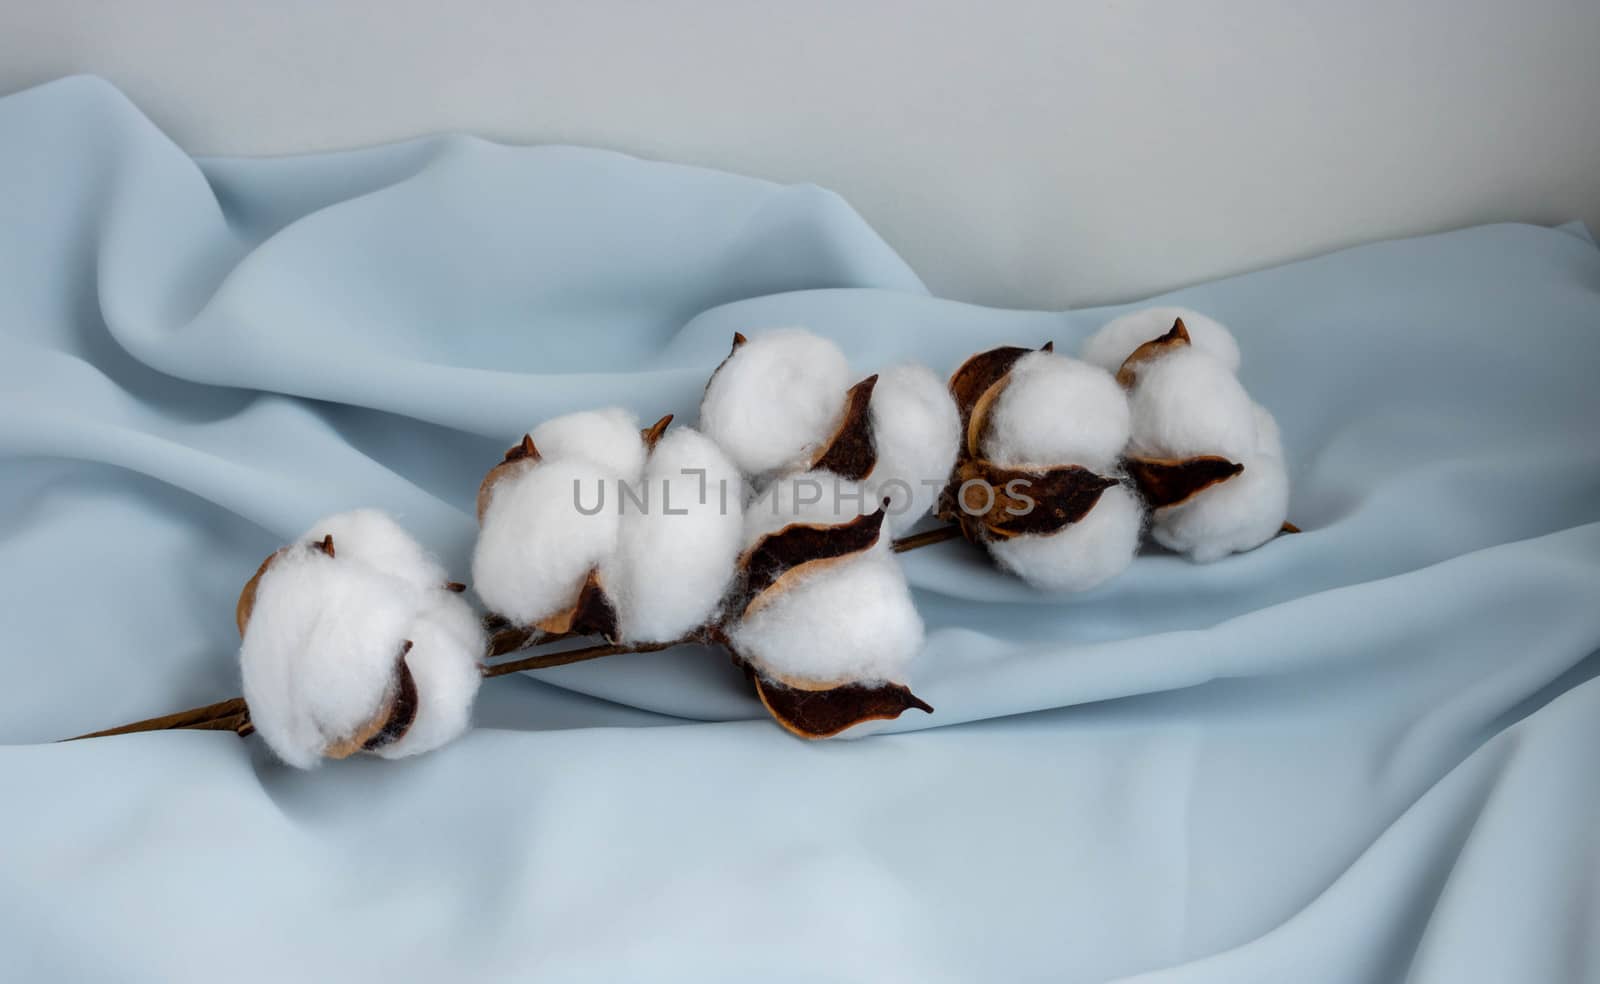 On a white background, a Sprig of cotton lies on soft blue silk.